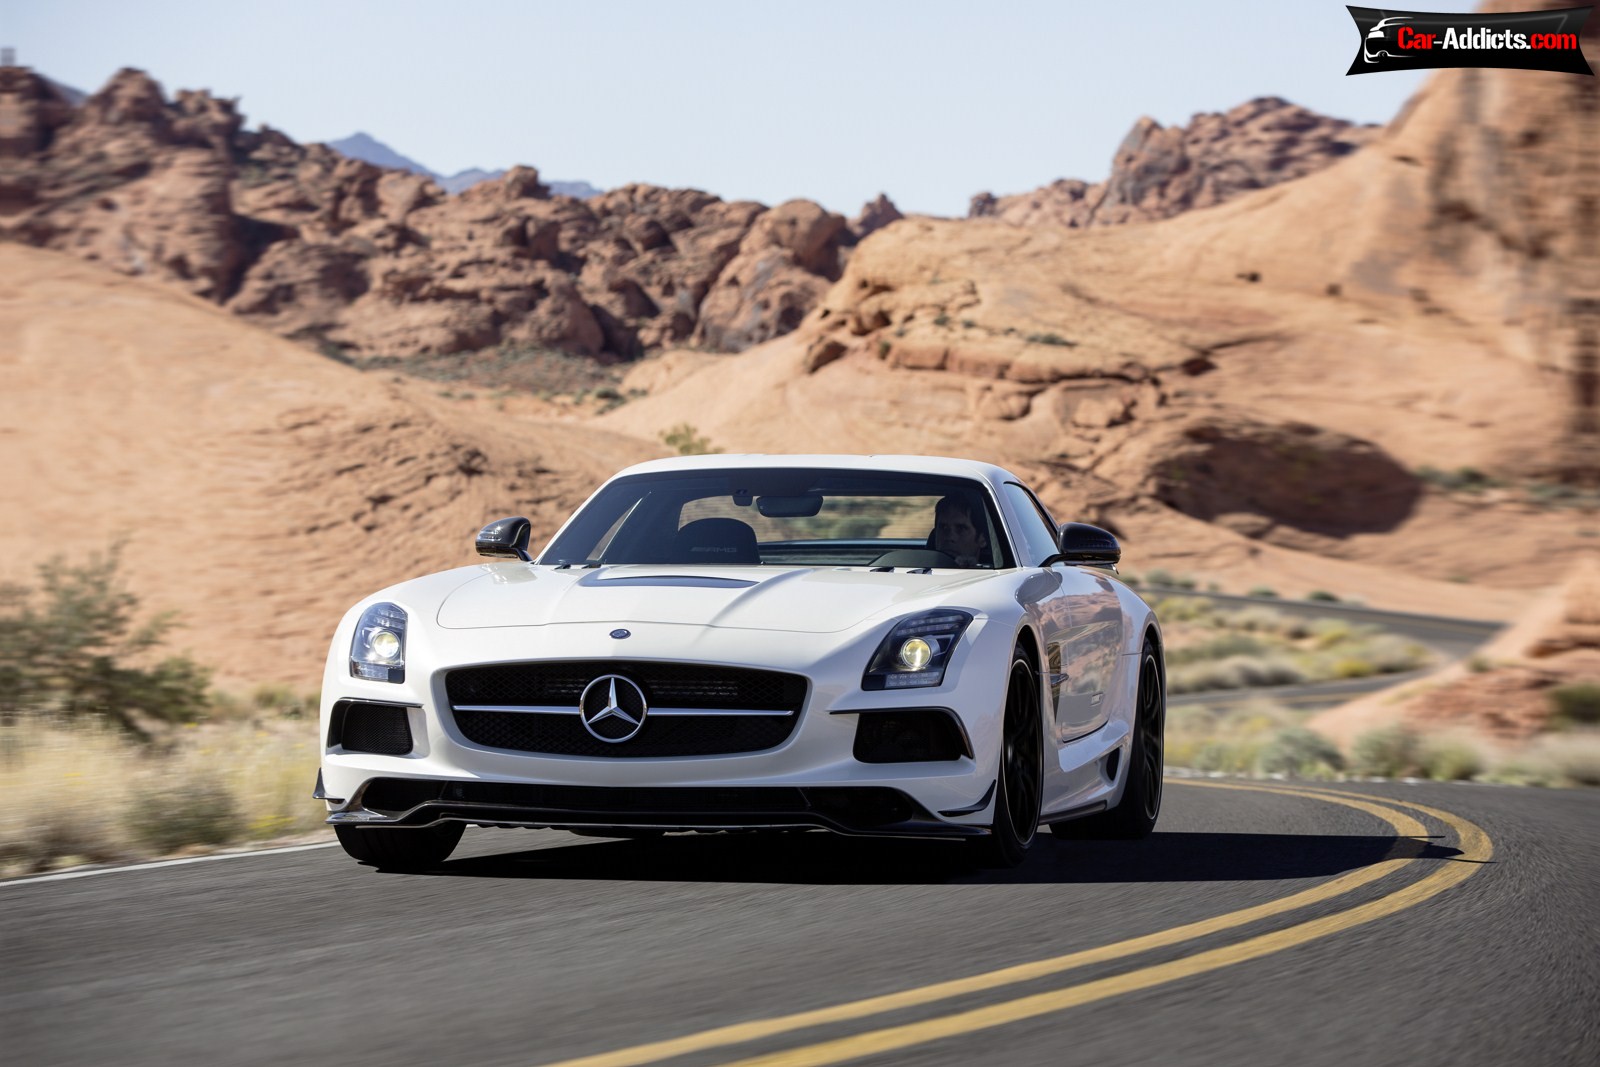 2014 Mercedes Benz SLS AMG Coupe Black Series Wallpaper [photo gallery